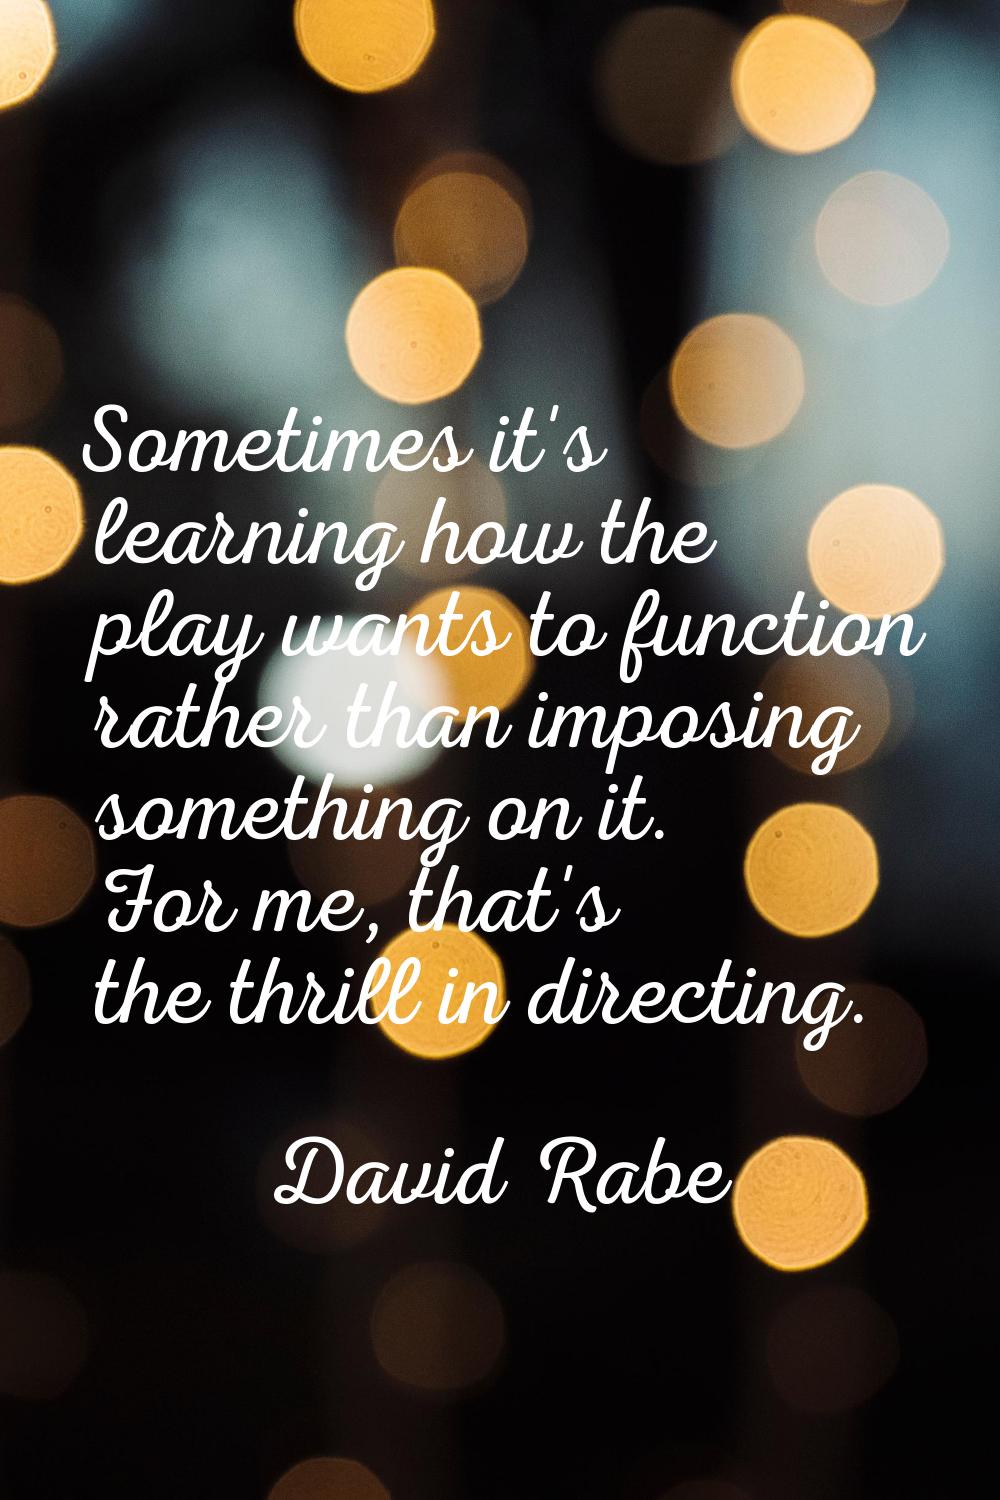 Sometimes it's learning how the play wants to function rather than imposing something on it. For me